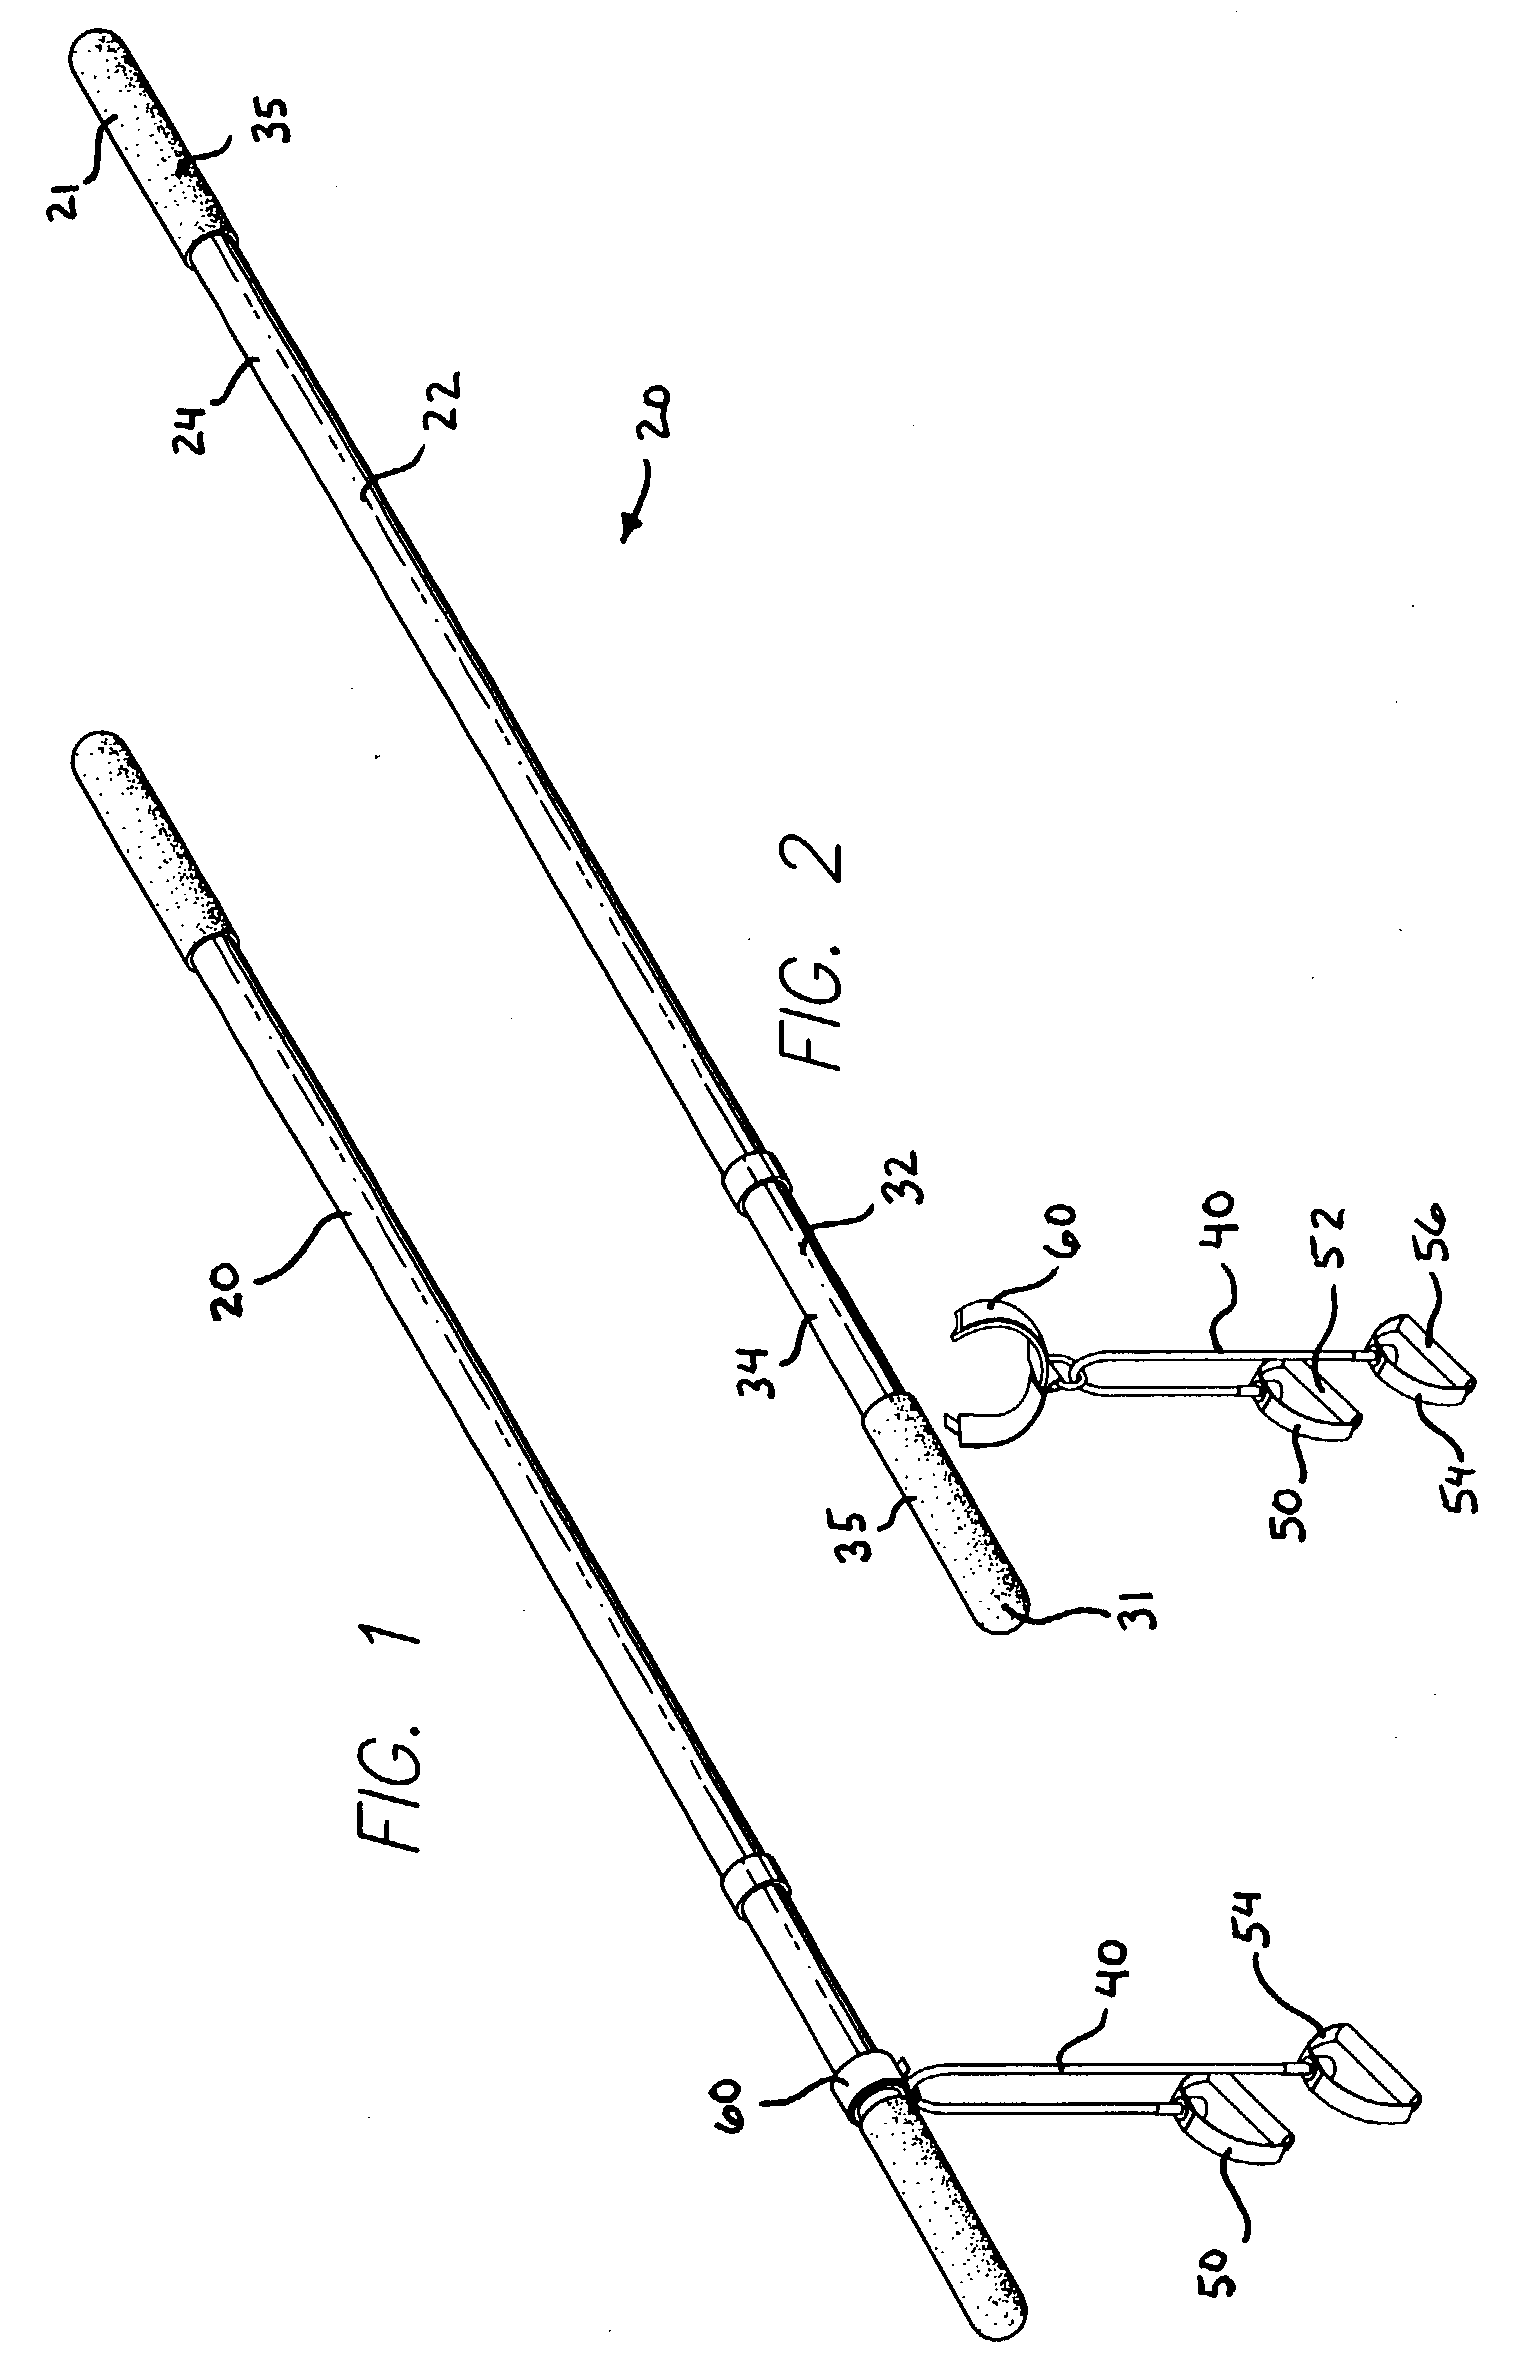 Portable exercise apparatus and method